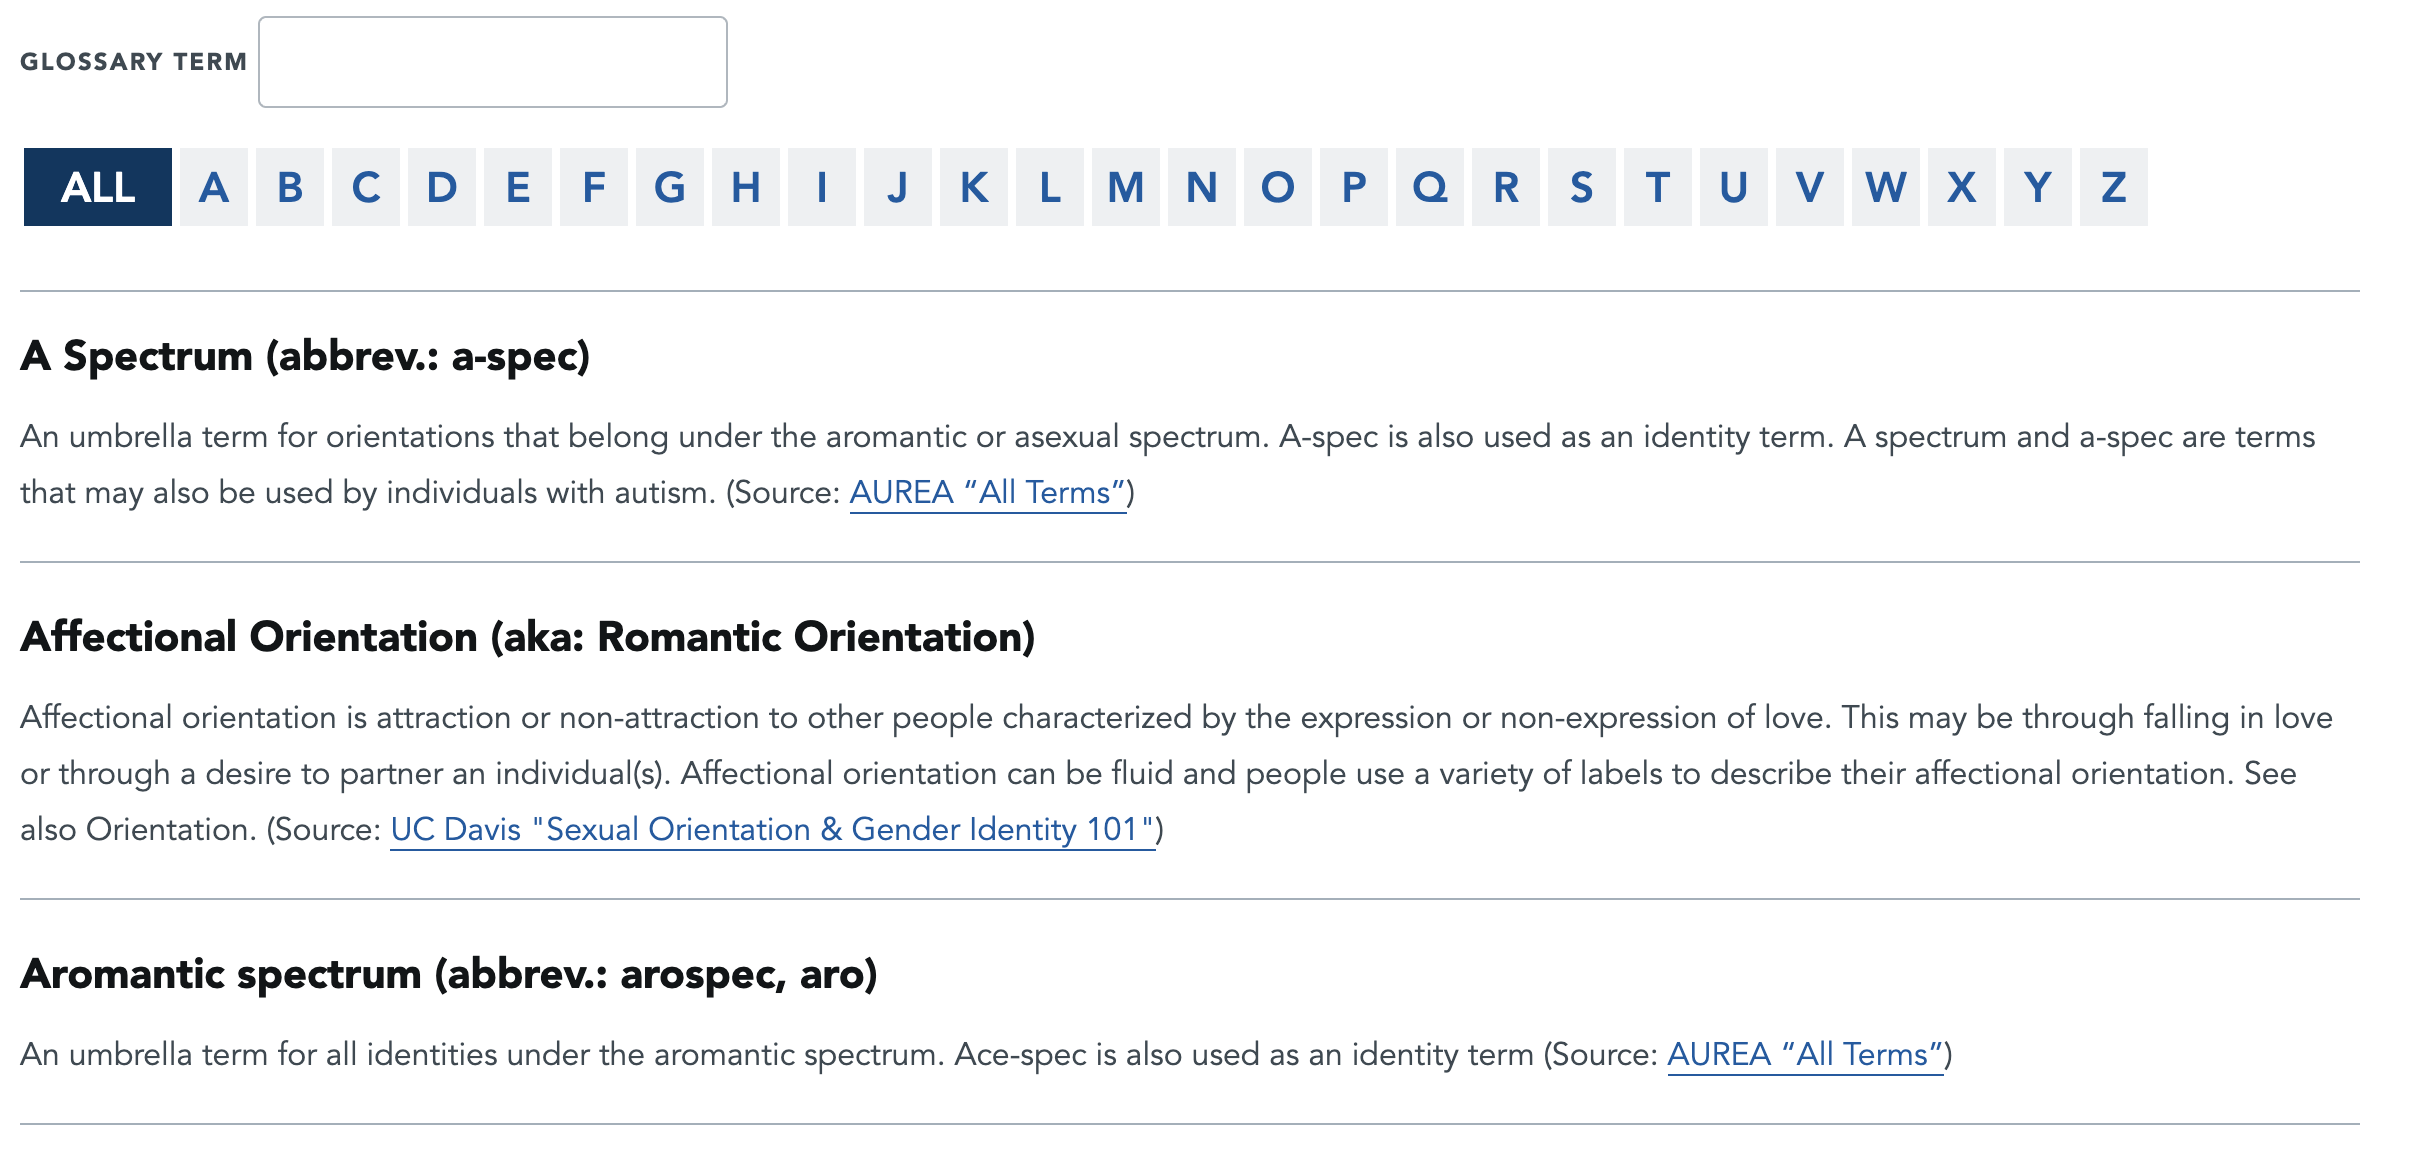 sample screenshot of the glossary of terms module